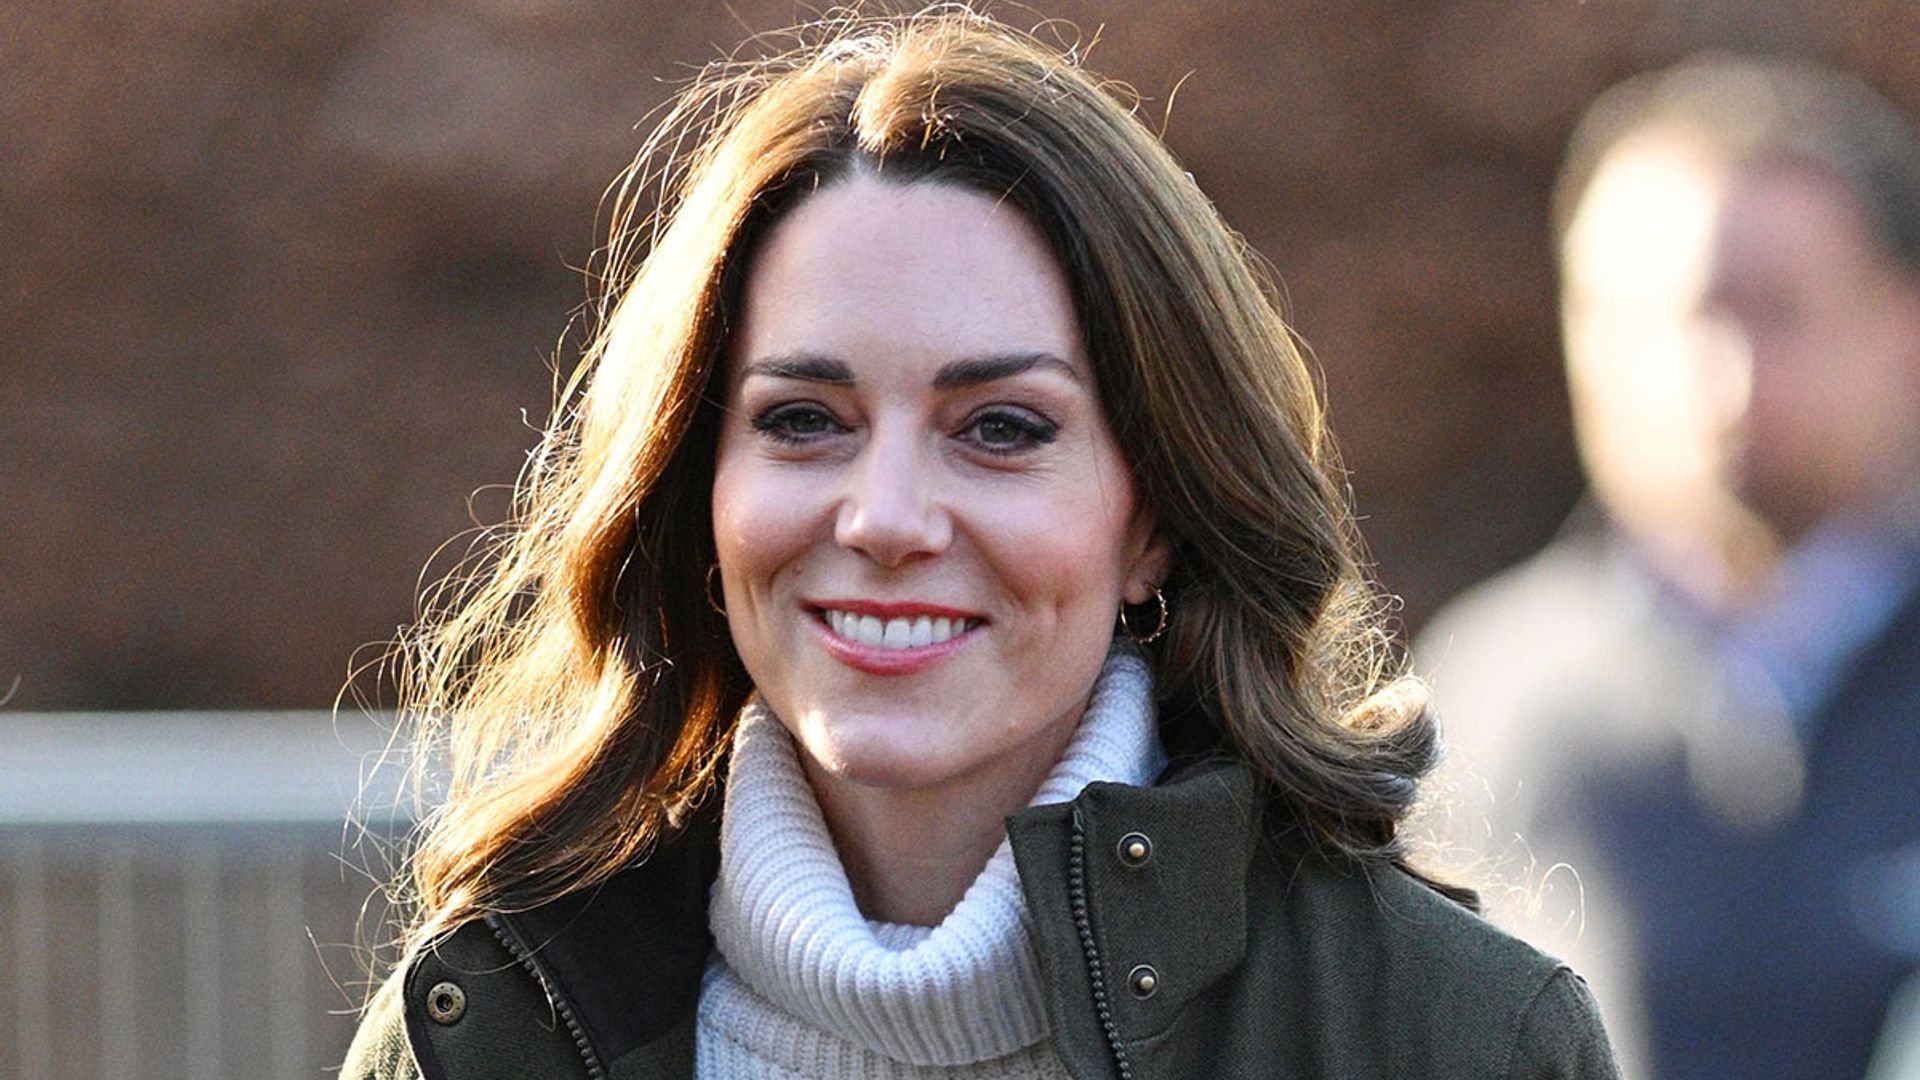 kate-middleton-new-outfit-denmark-barbour-jacket